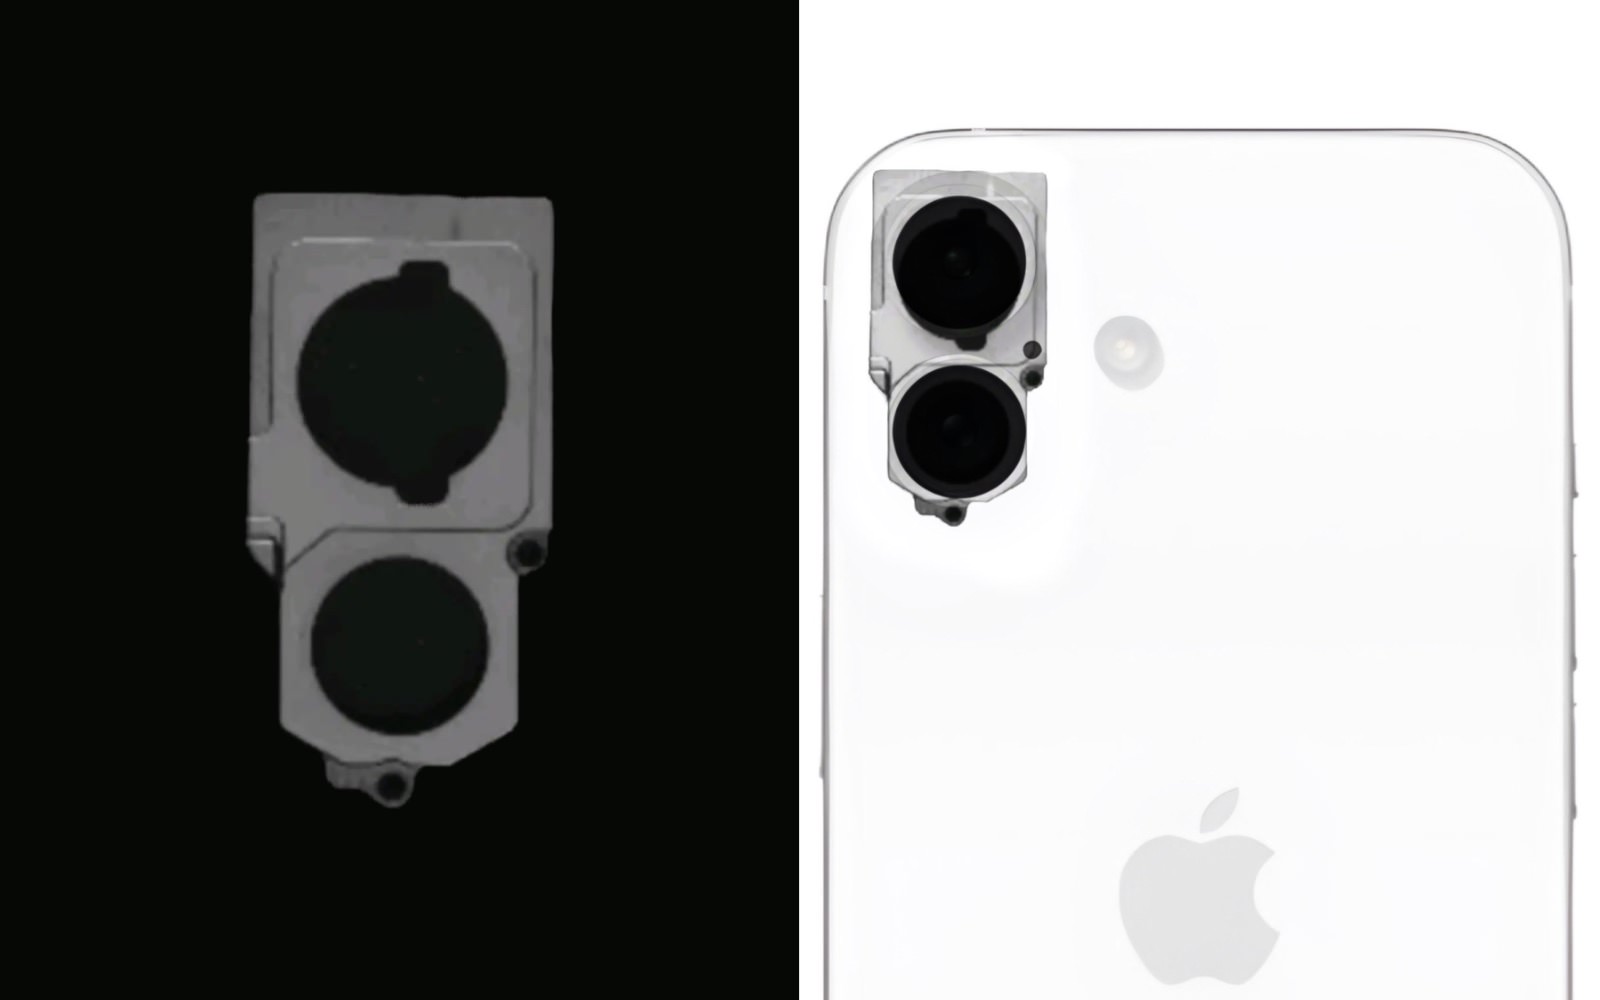 iphone16-leaked-component.jpg